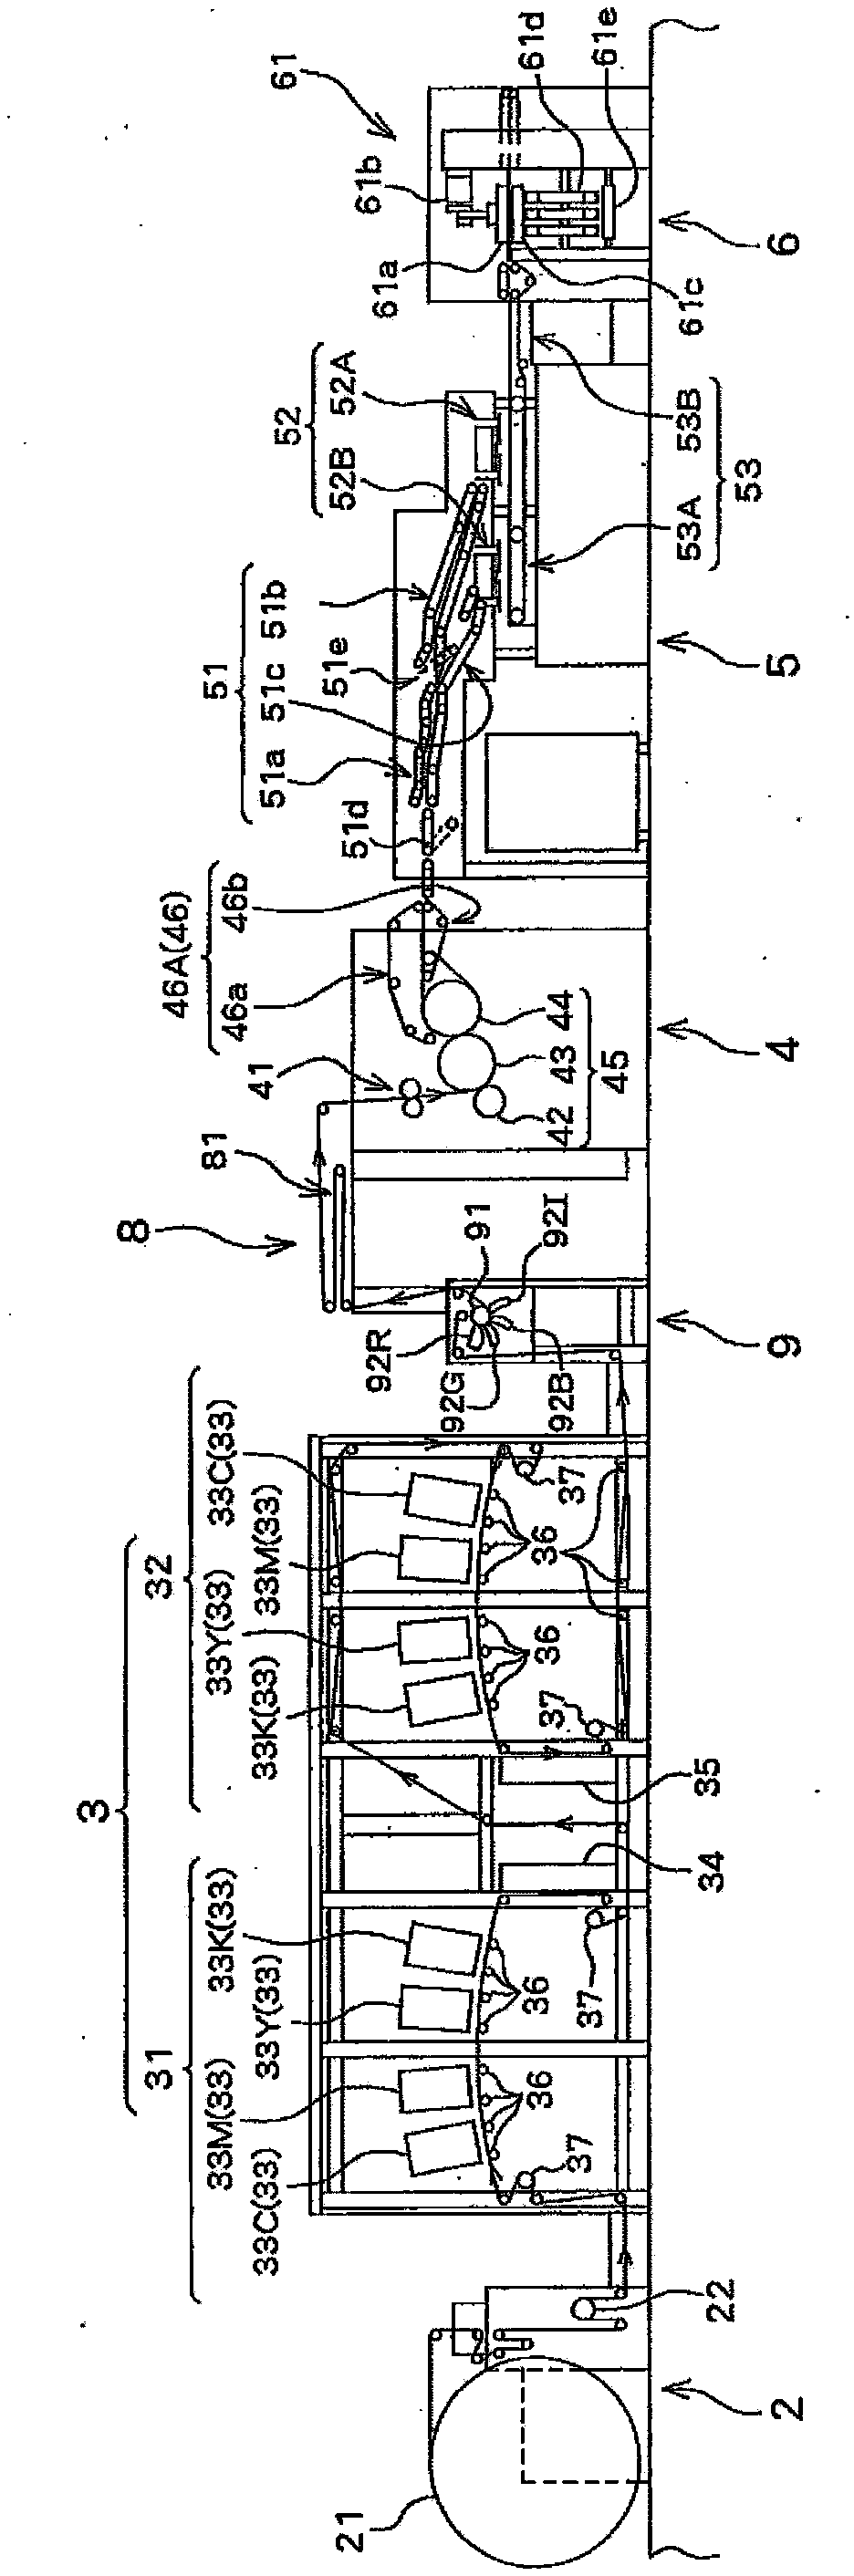 Device for manufacturing printed object